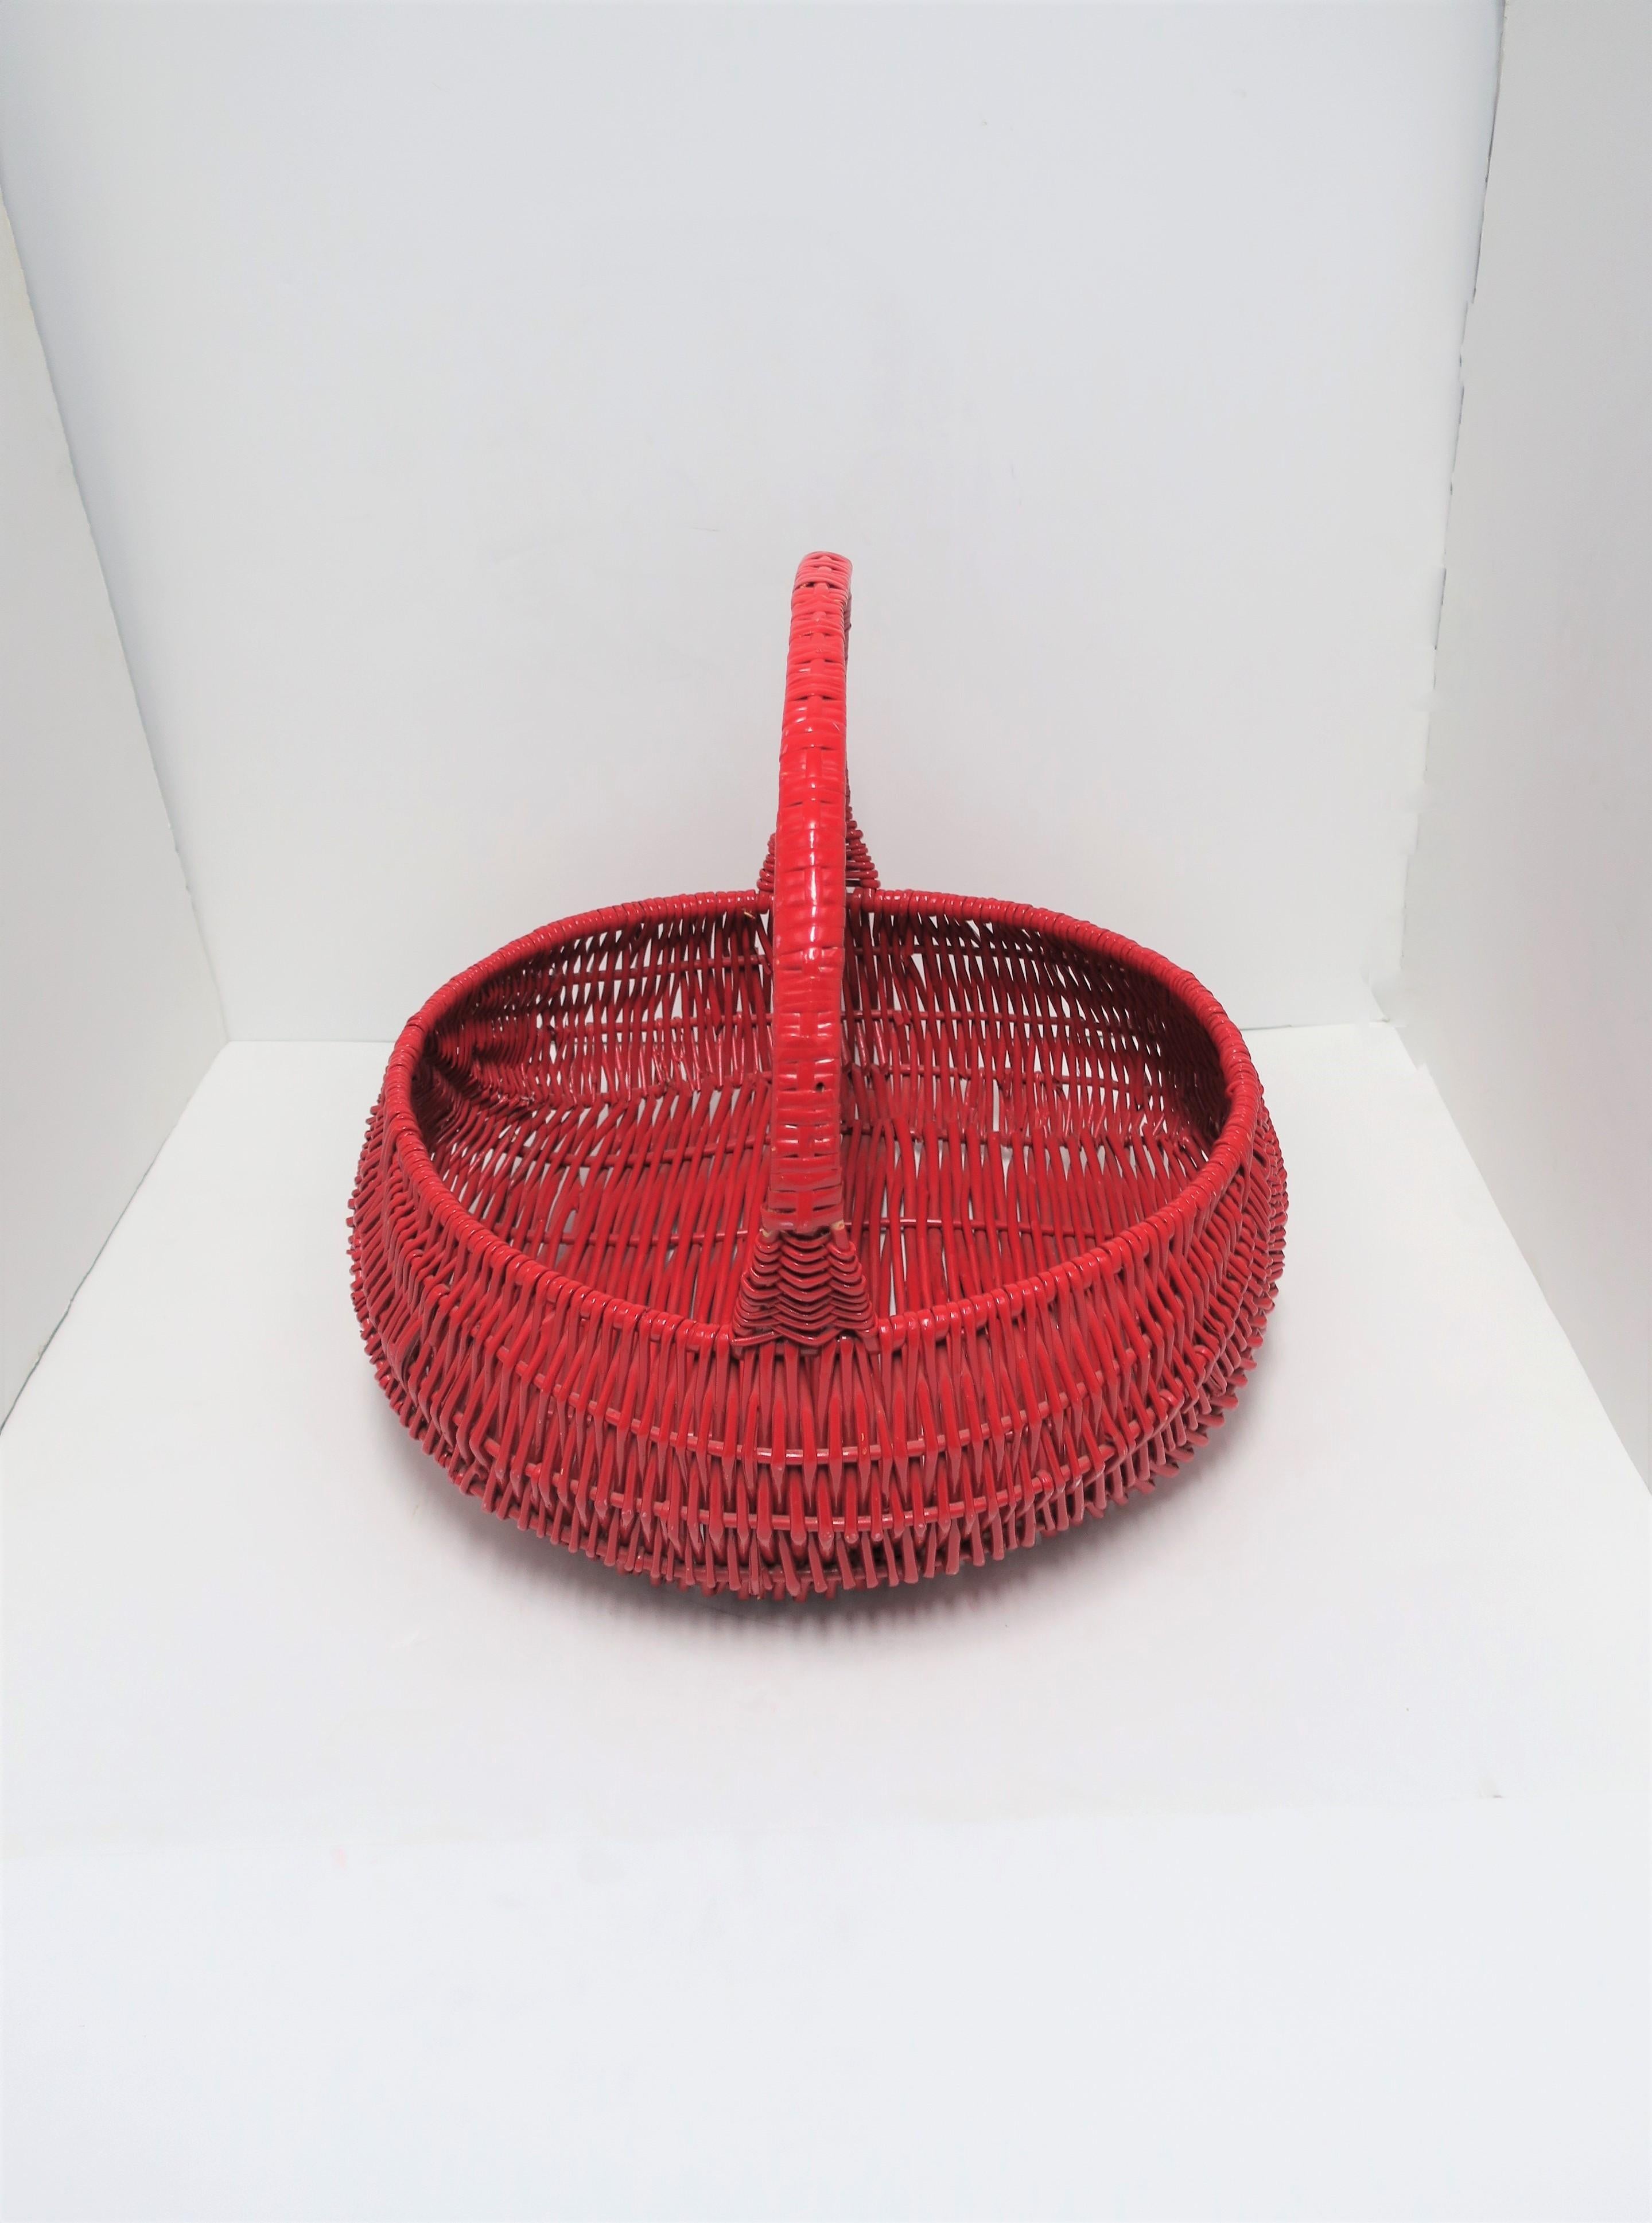 American Wicker Basket Red Lacquer, Large